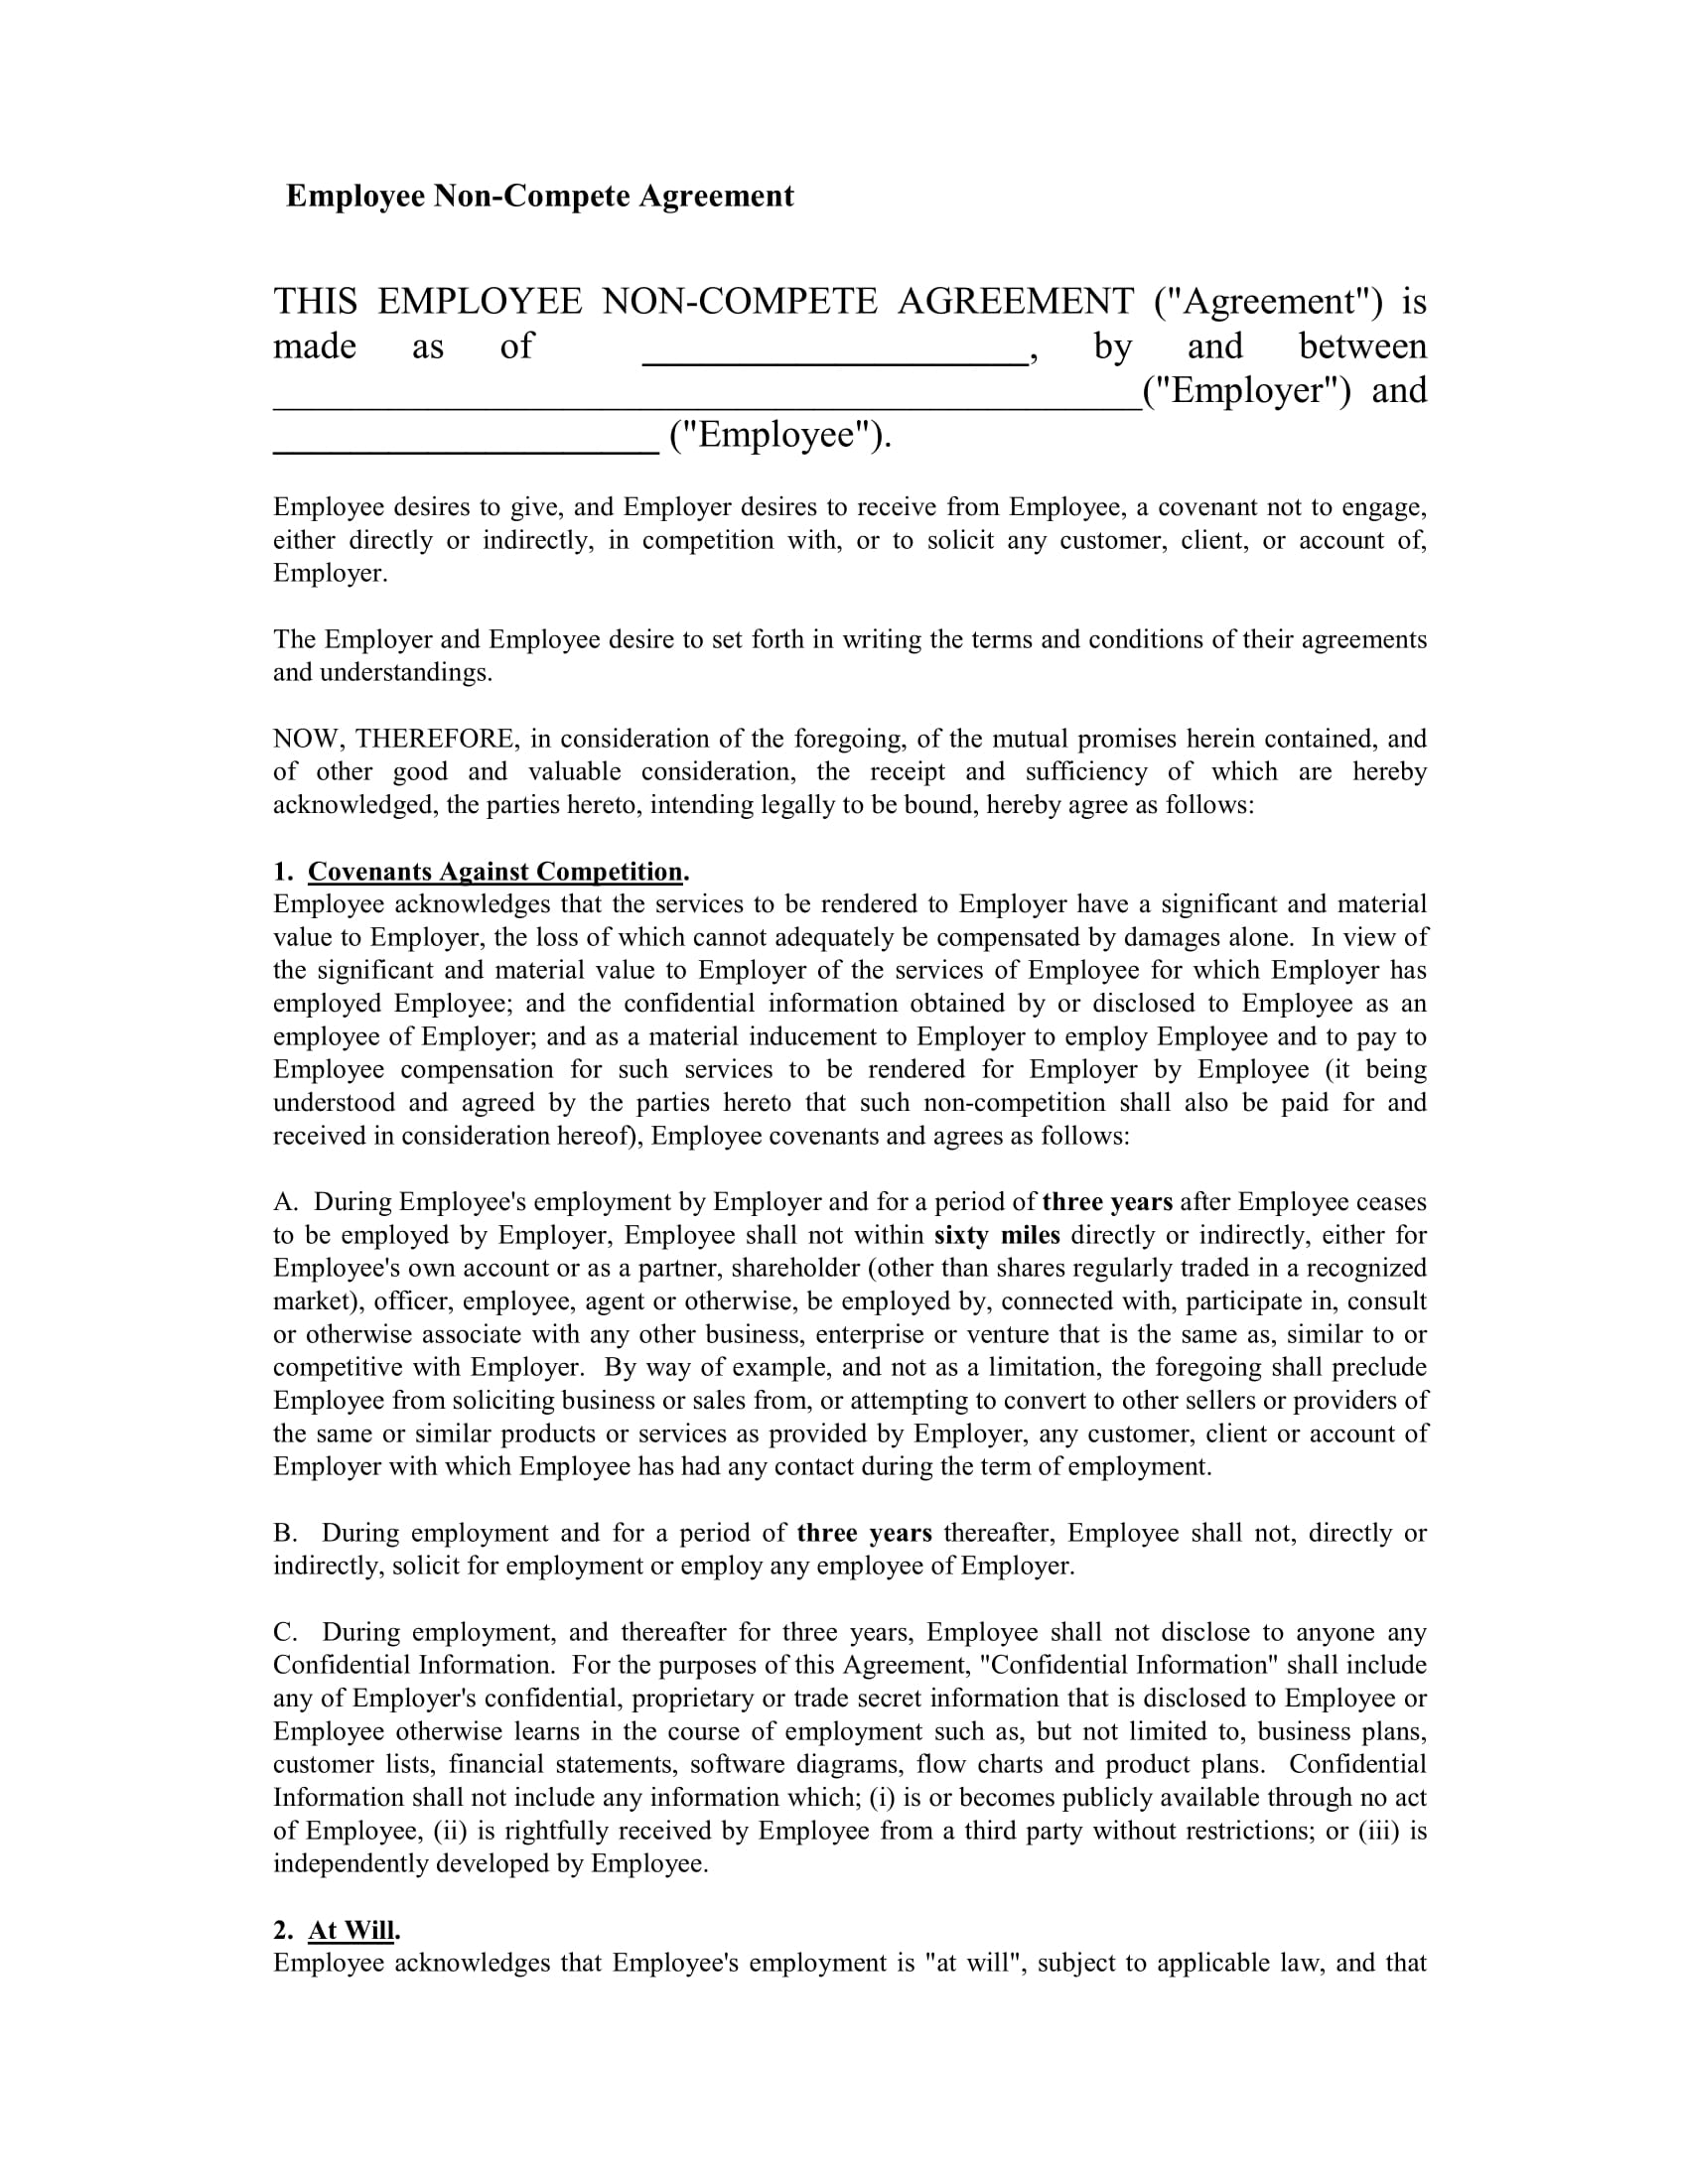 general employe non compete agreement contract form 1